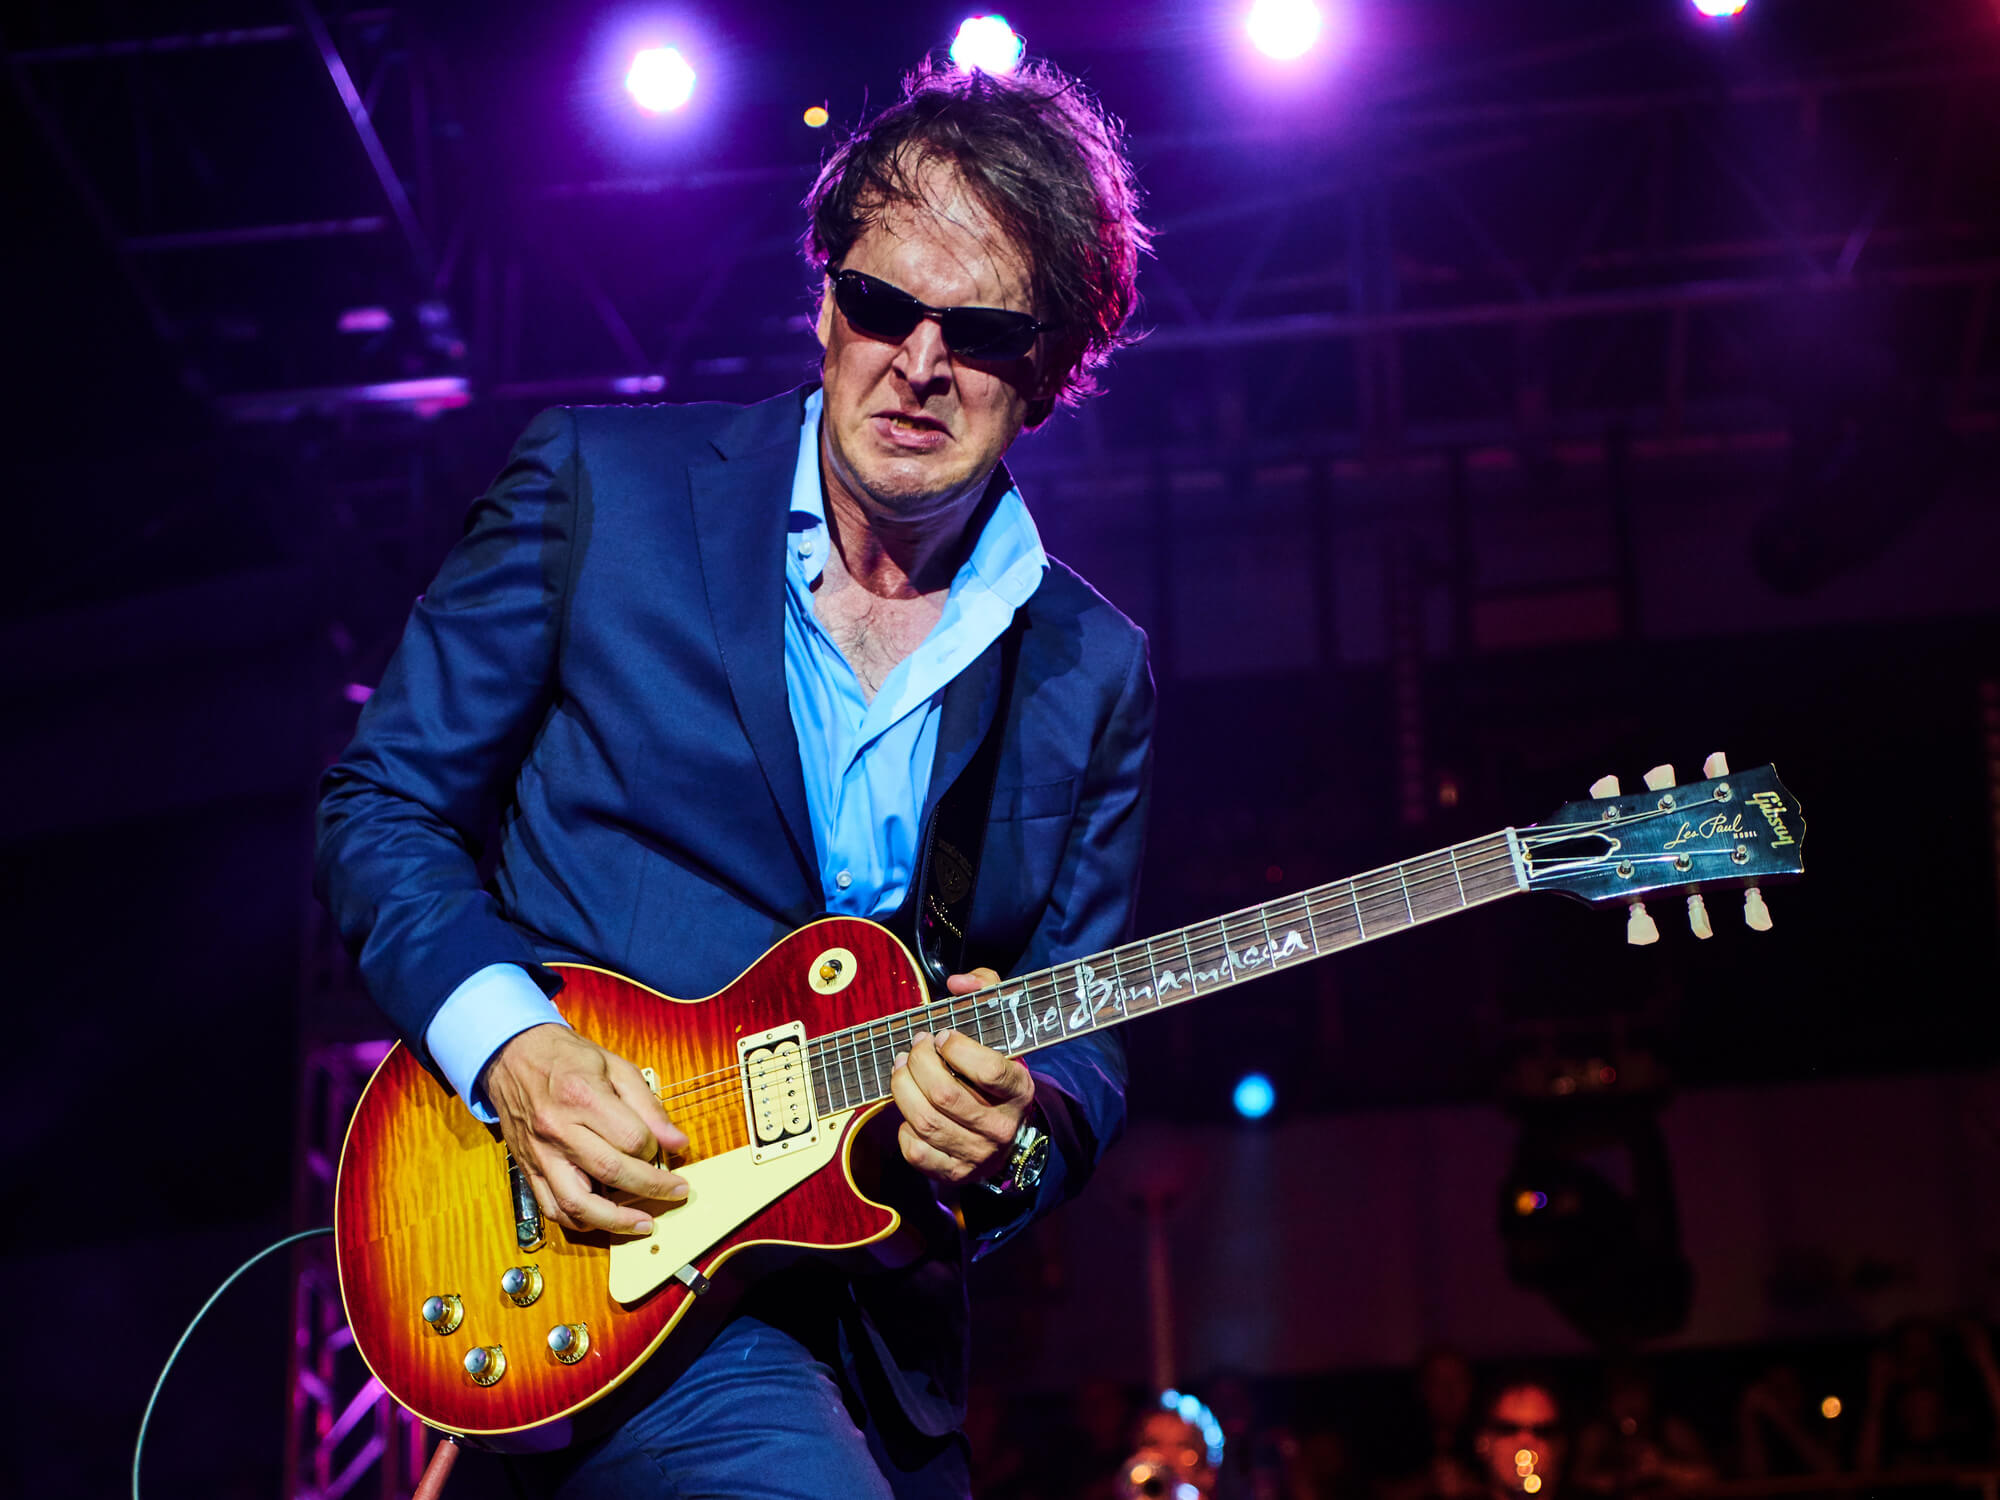 Joe Bonamassa performing live on stage during the Keeping The Blues Alive At Sea event